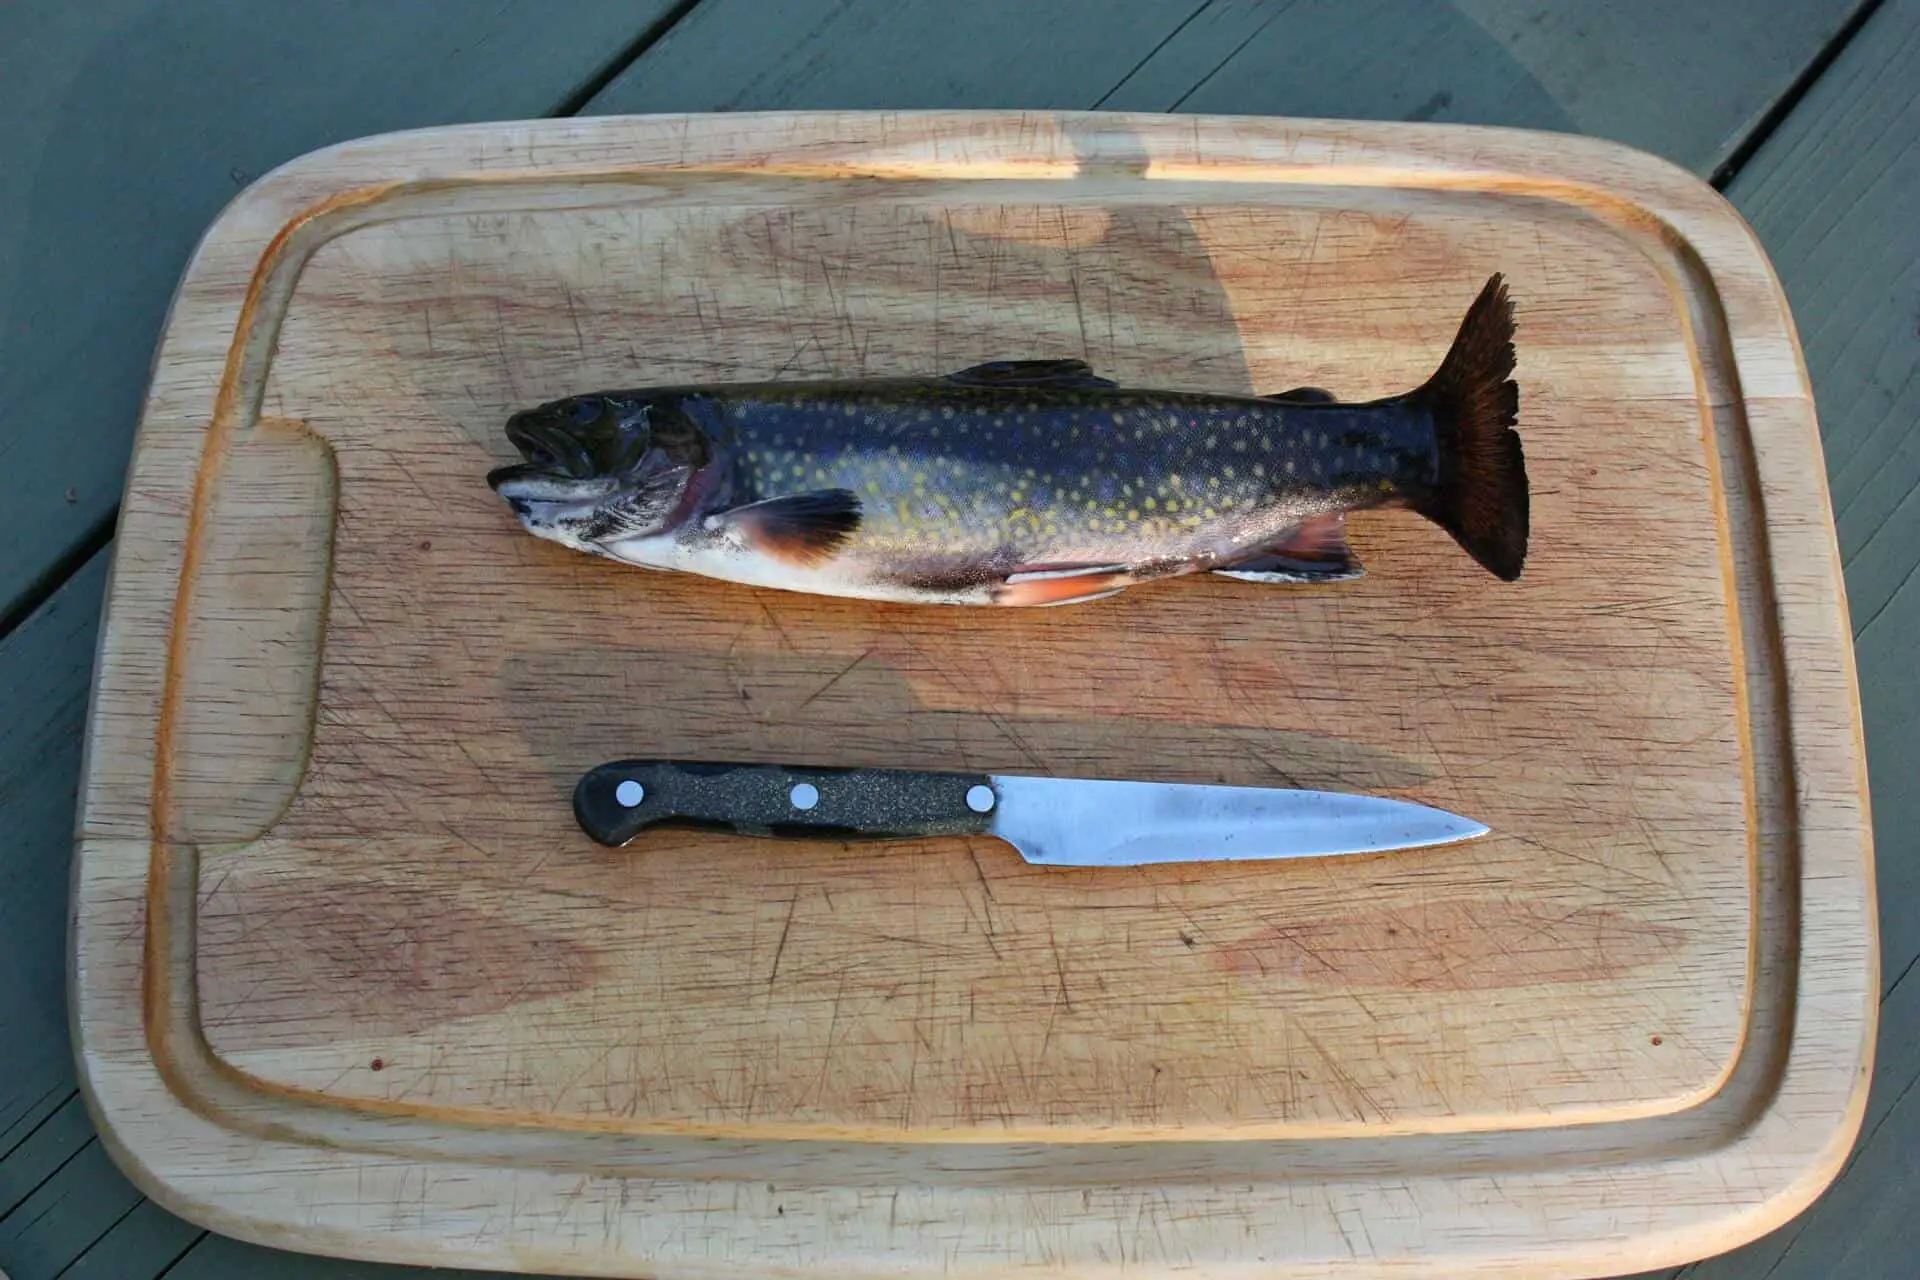 Cleaning a fish: rainbow trout about to be cleaned